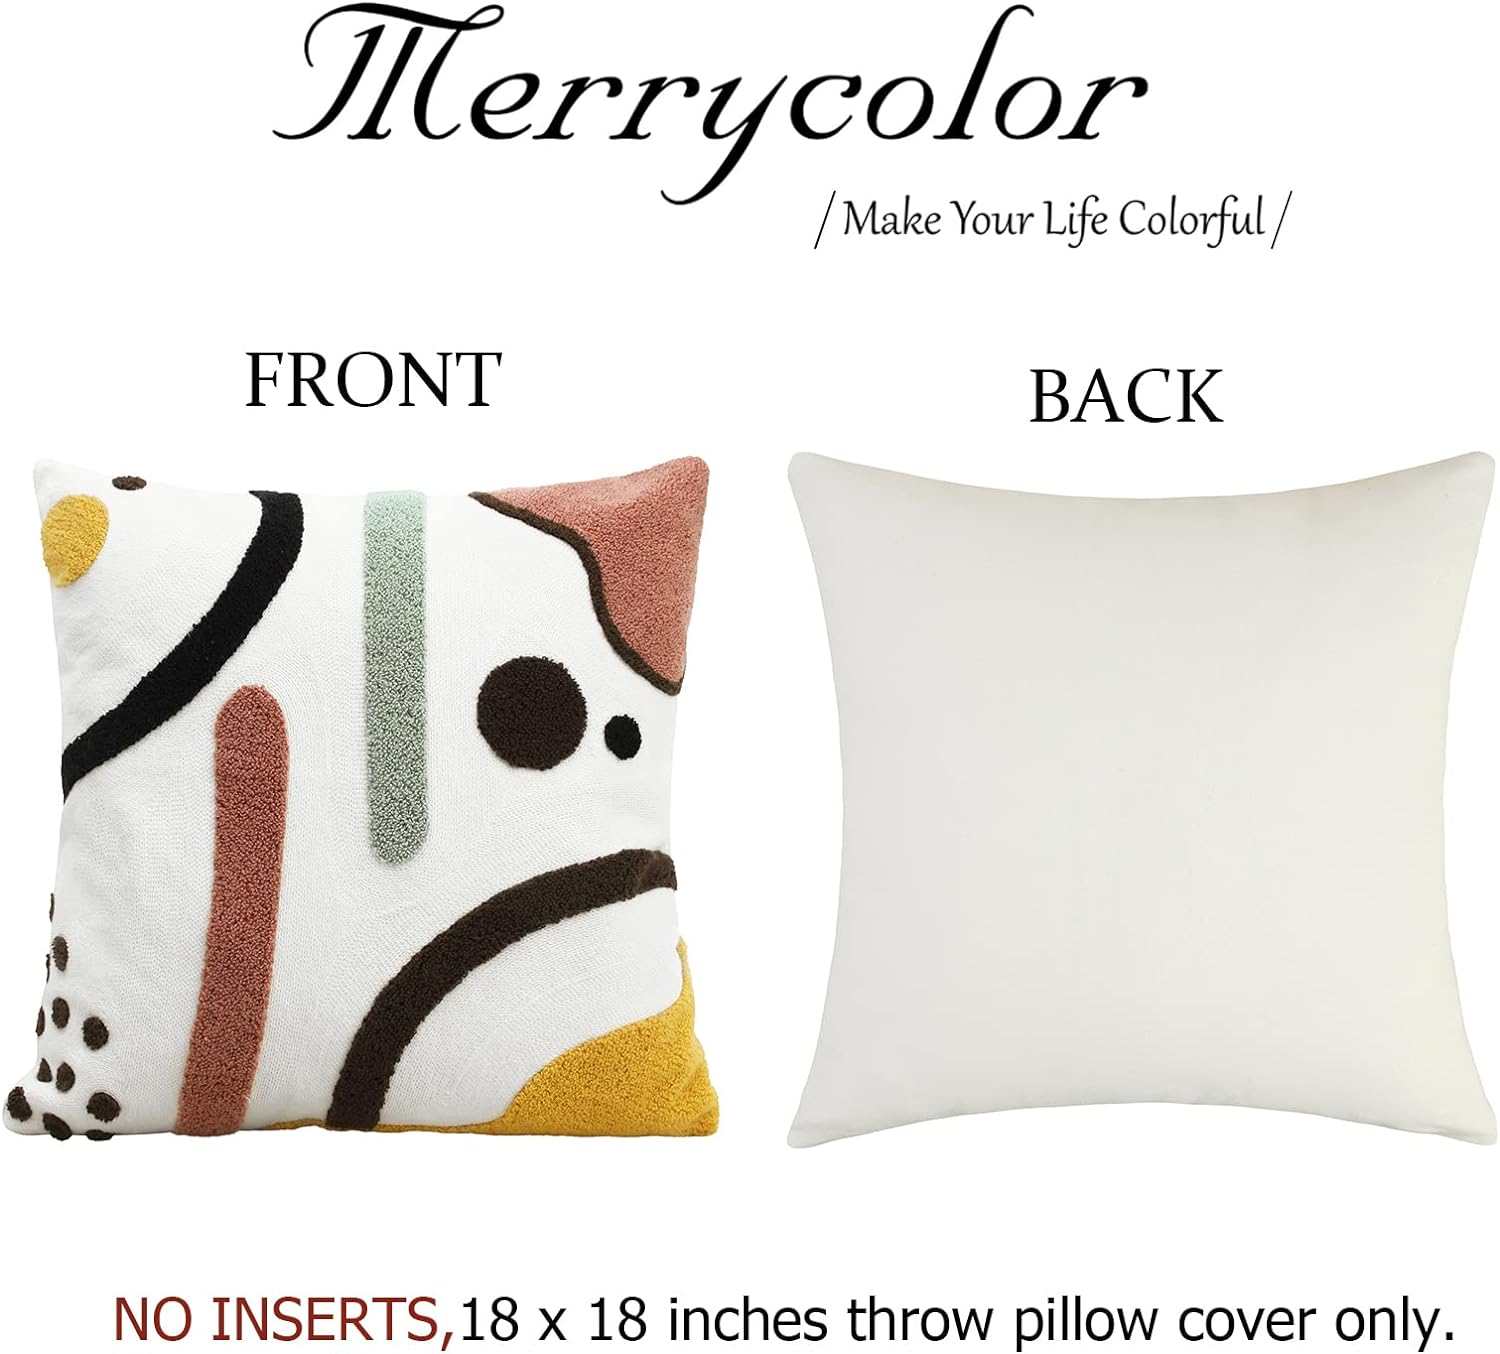 Merrycolor Colorful Boho Throw Pillow Covers 18x18 inch: A Review of Modern Abstract Line Art Decorative Pillows